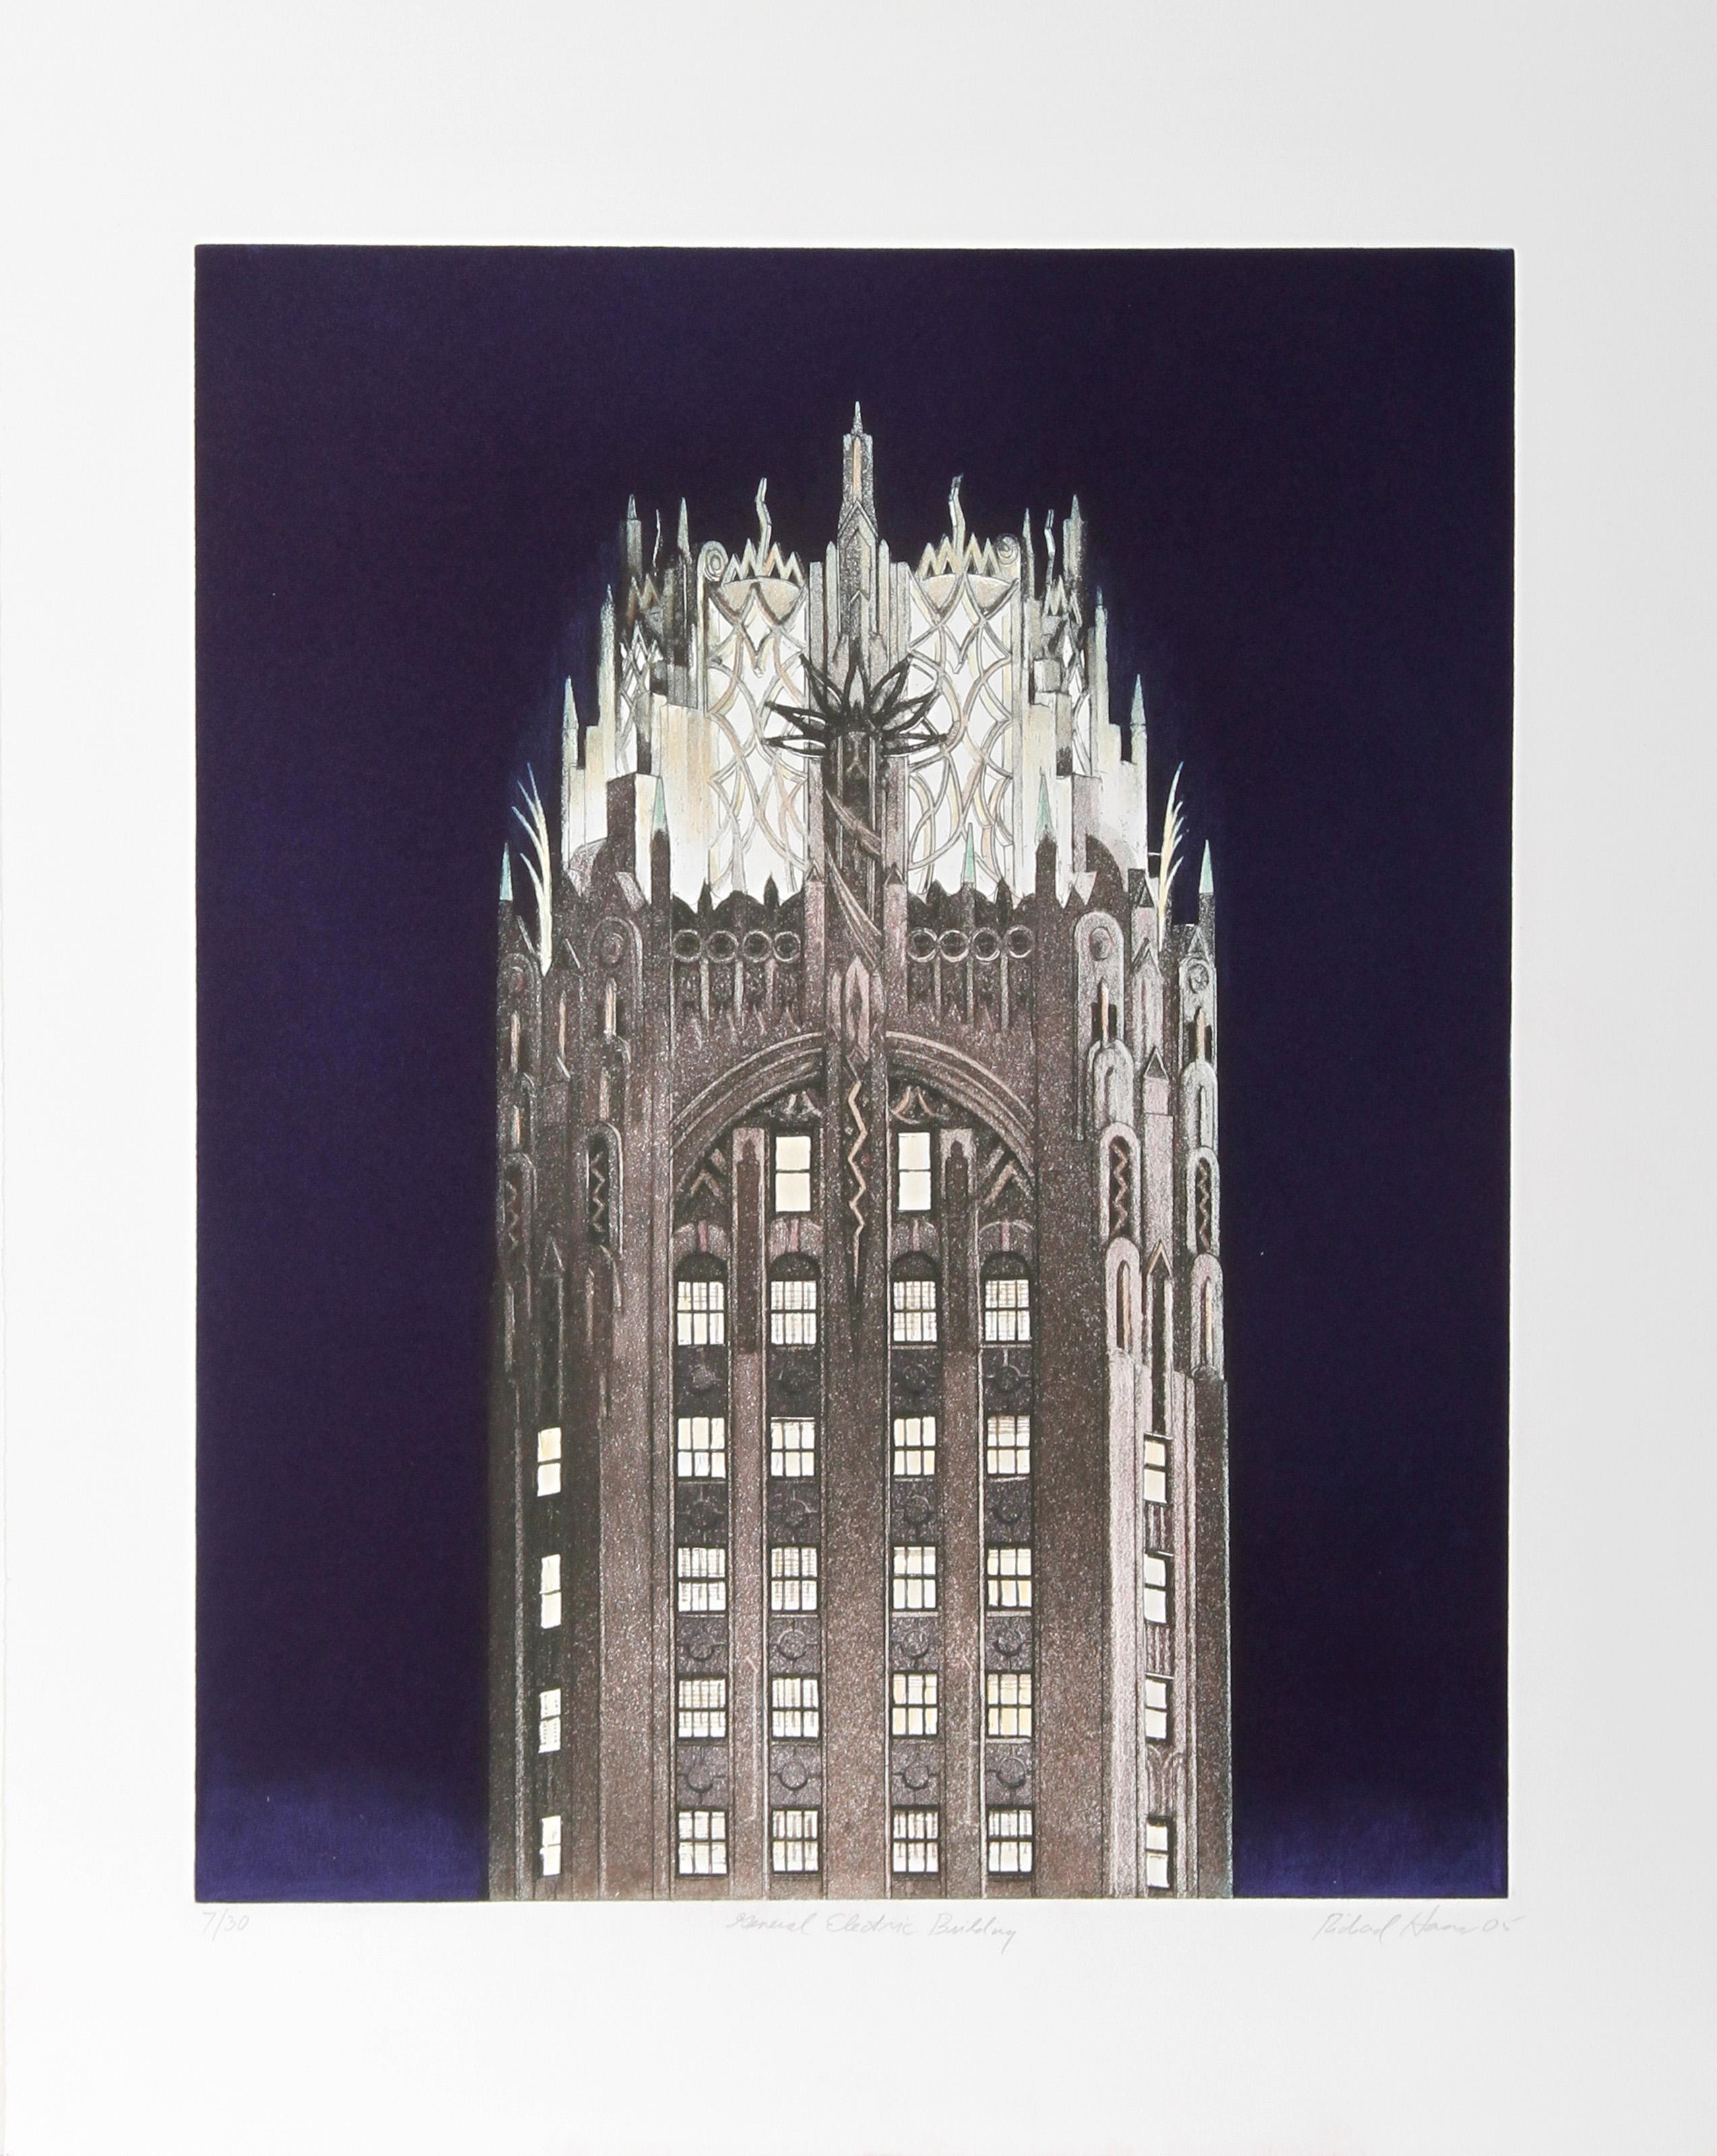 Richard Haas, American (1936 - ) -  General Electric Building (Blue). Year: 2005, Medium: Etching, signed and numbered in pencil, Edition: 30, Image Size: 20 x 16 inches, Size: 26  x 21 in. (66.04  x 53.34 cm), Description: An iconic etching